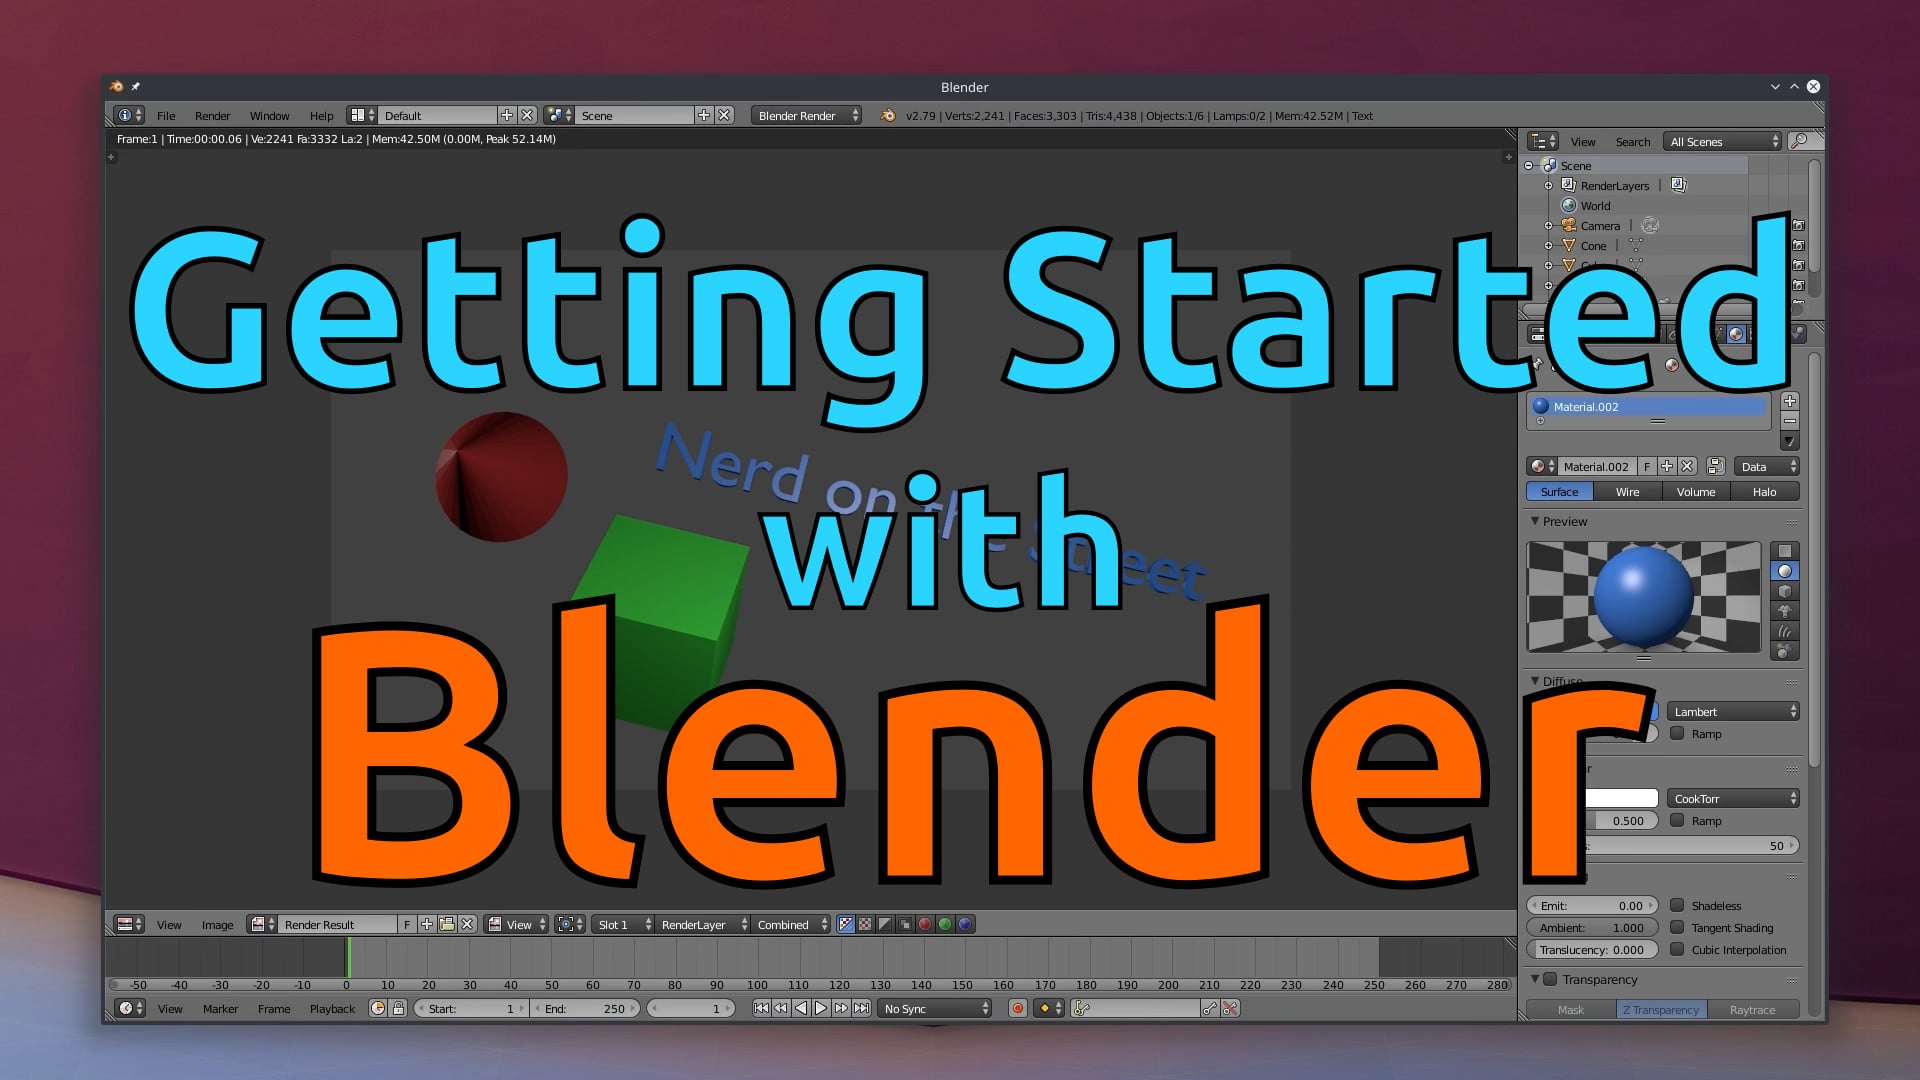 Getting Started with Blender